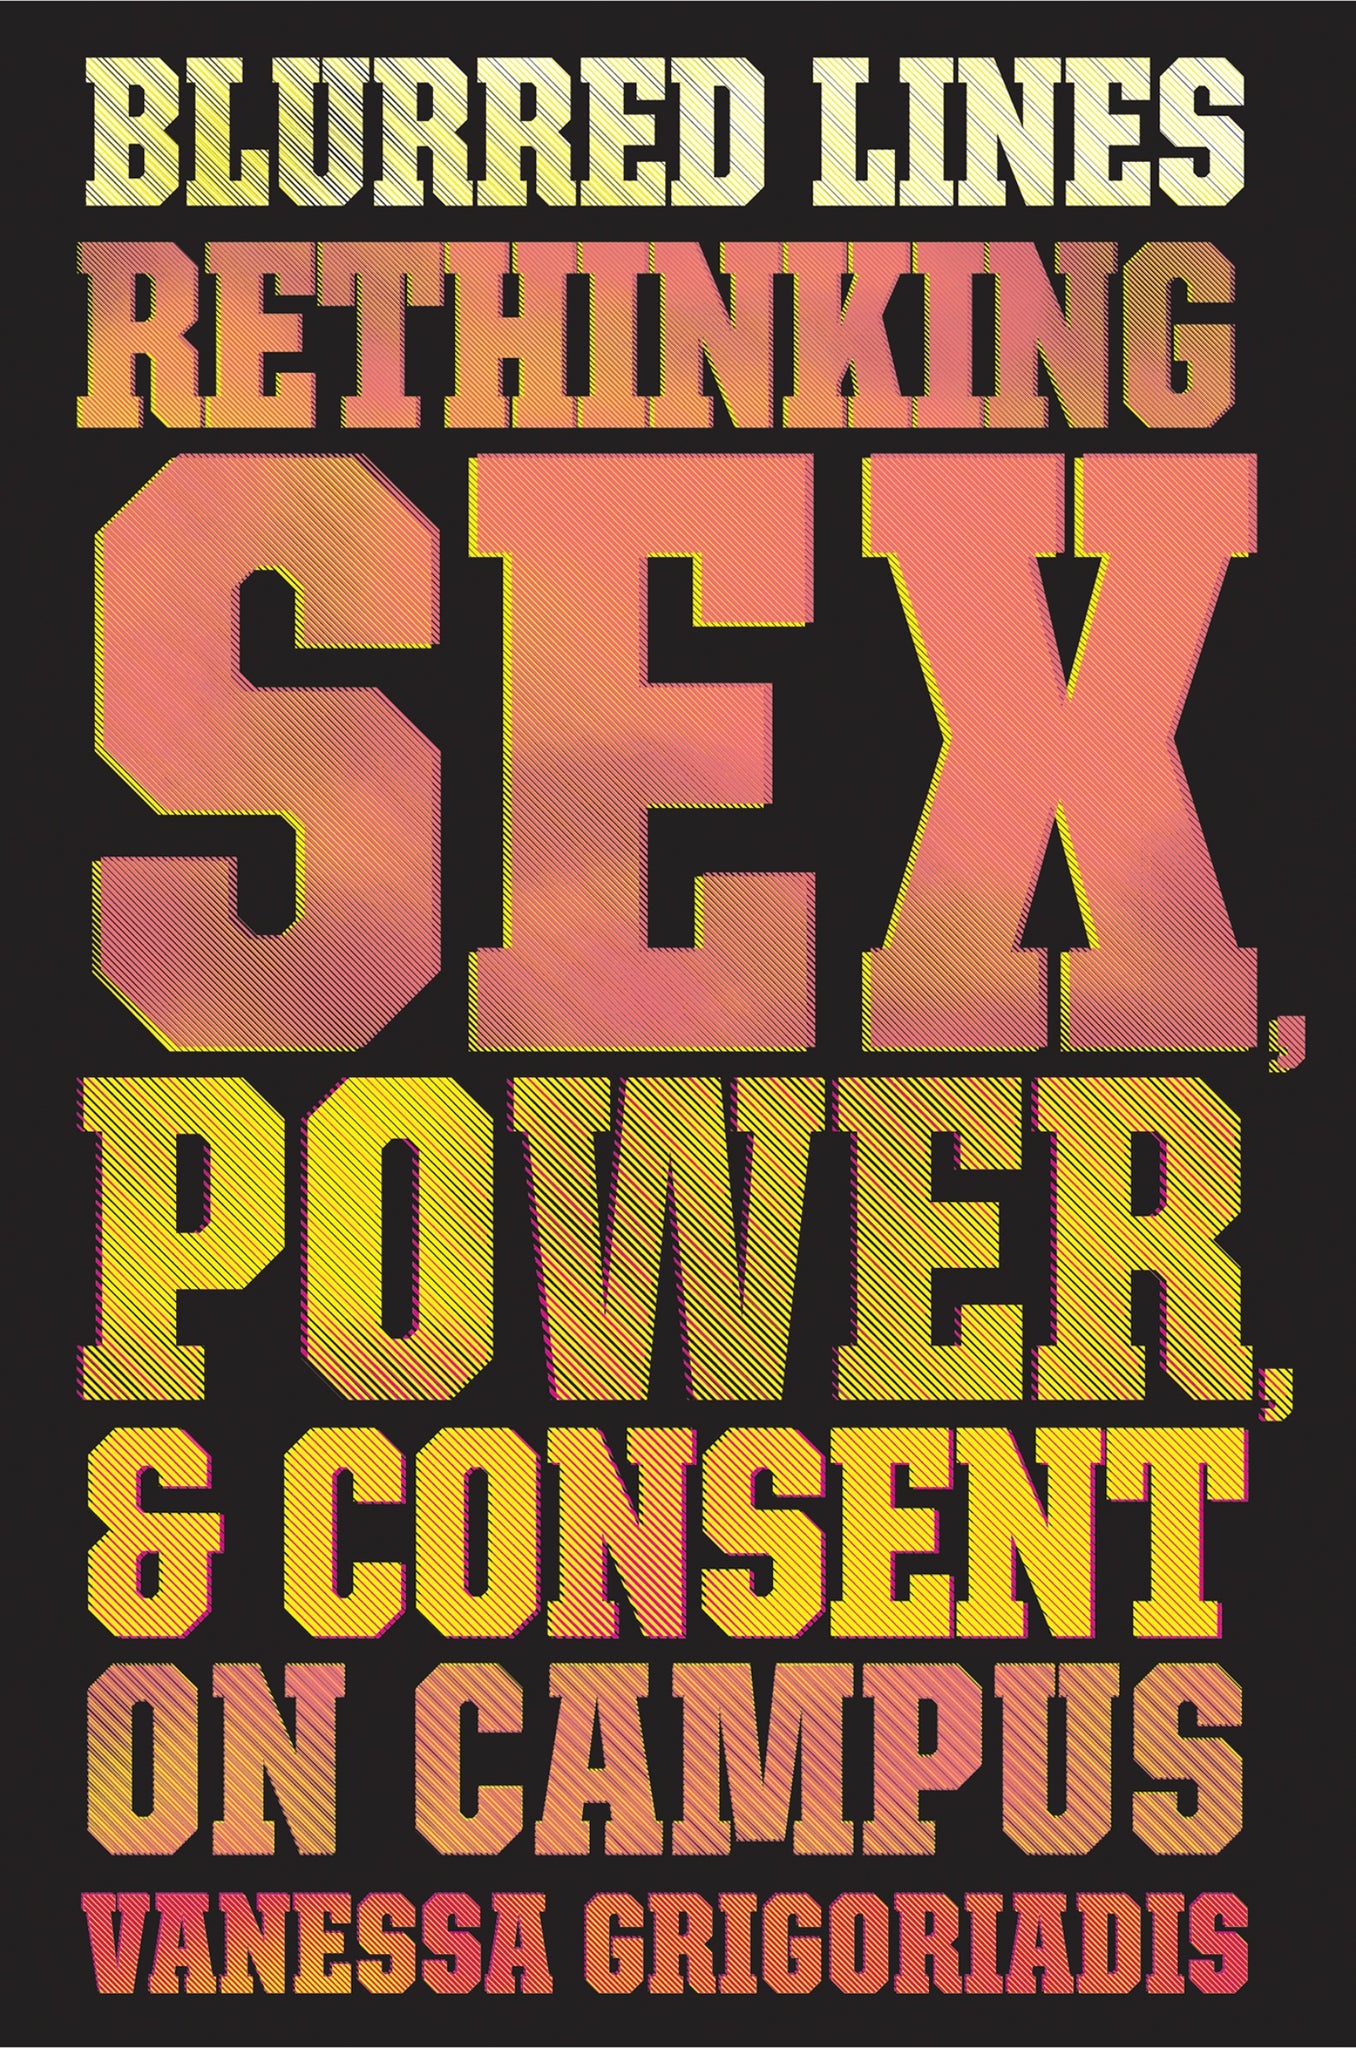 Blurred Lines : Rethinking Sex, Power, and Consent on Campus